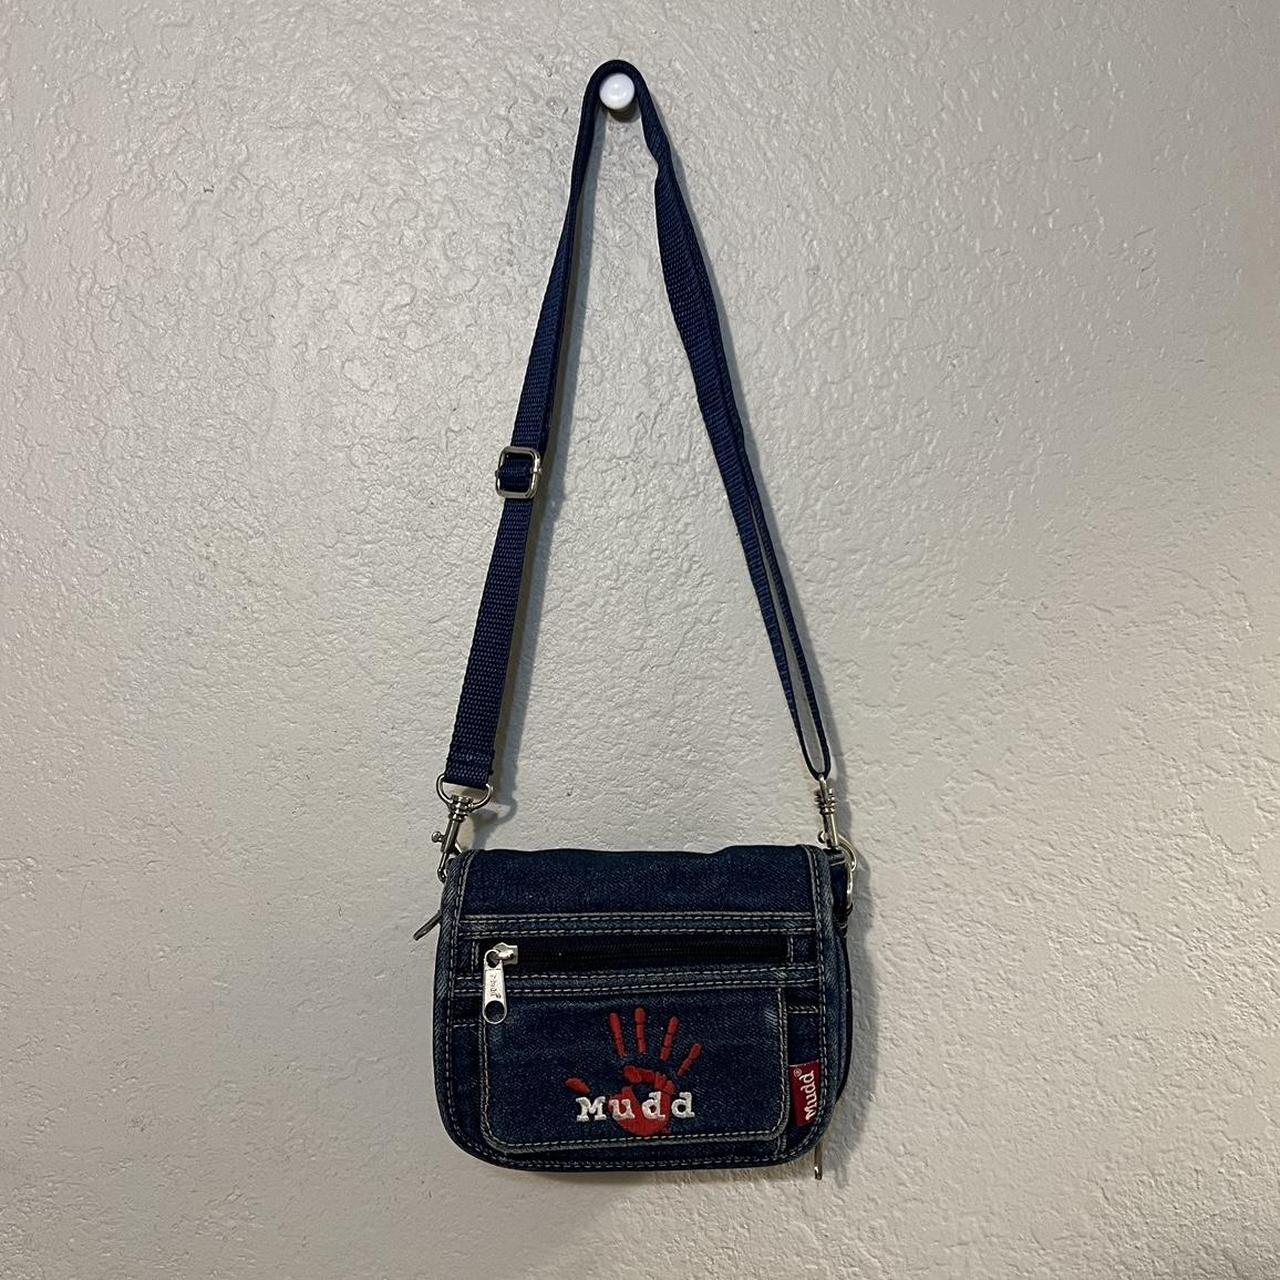 Mudd Clothing Women's Navy and Red Bag (2)